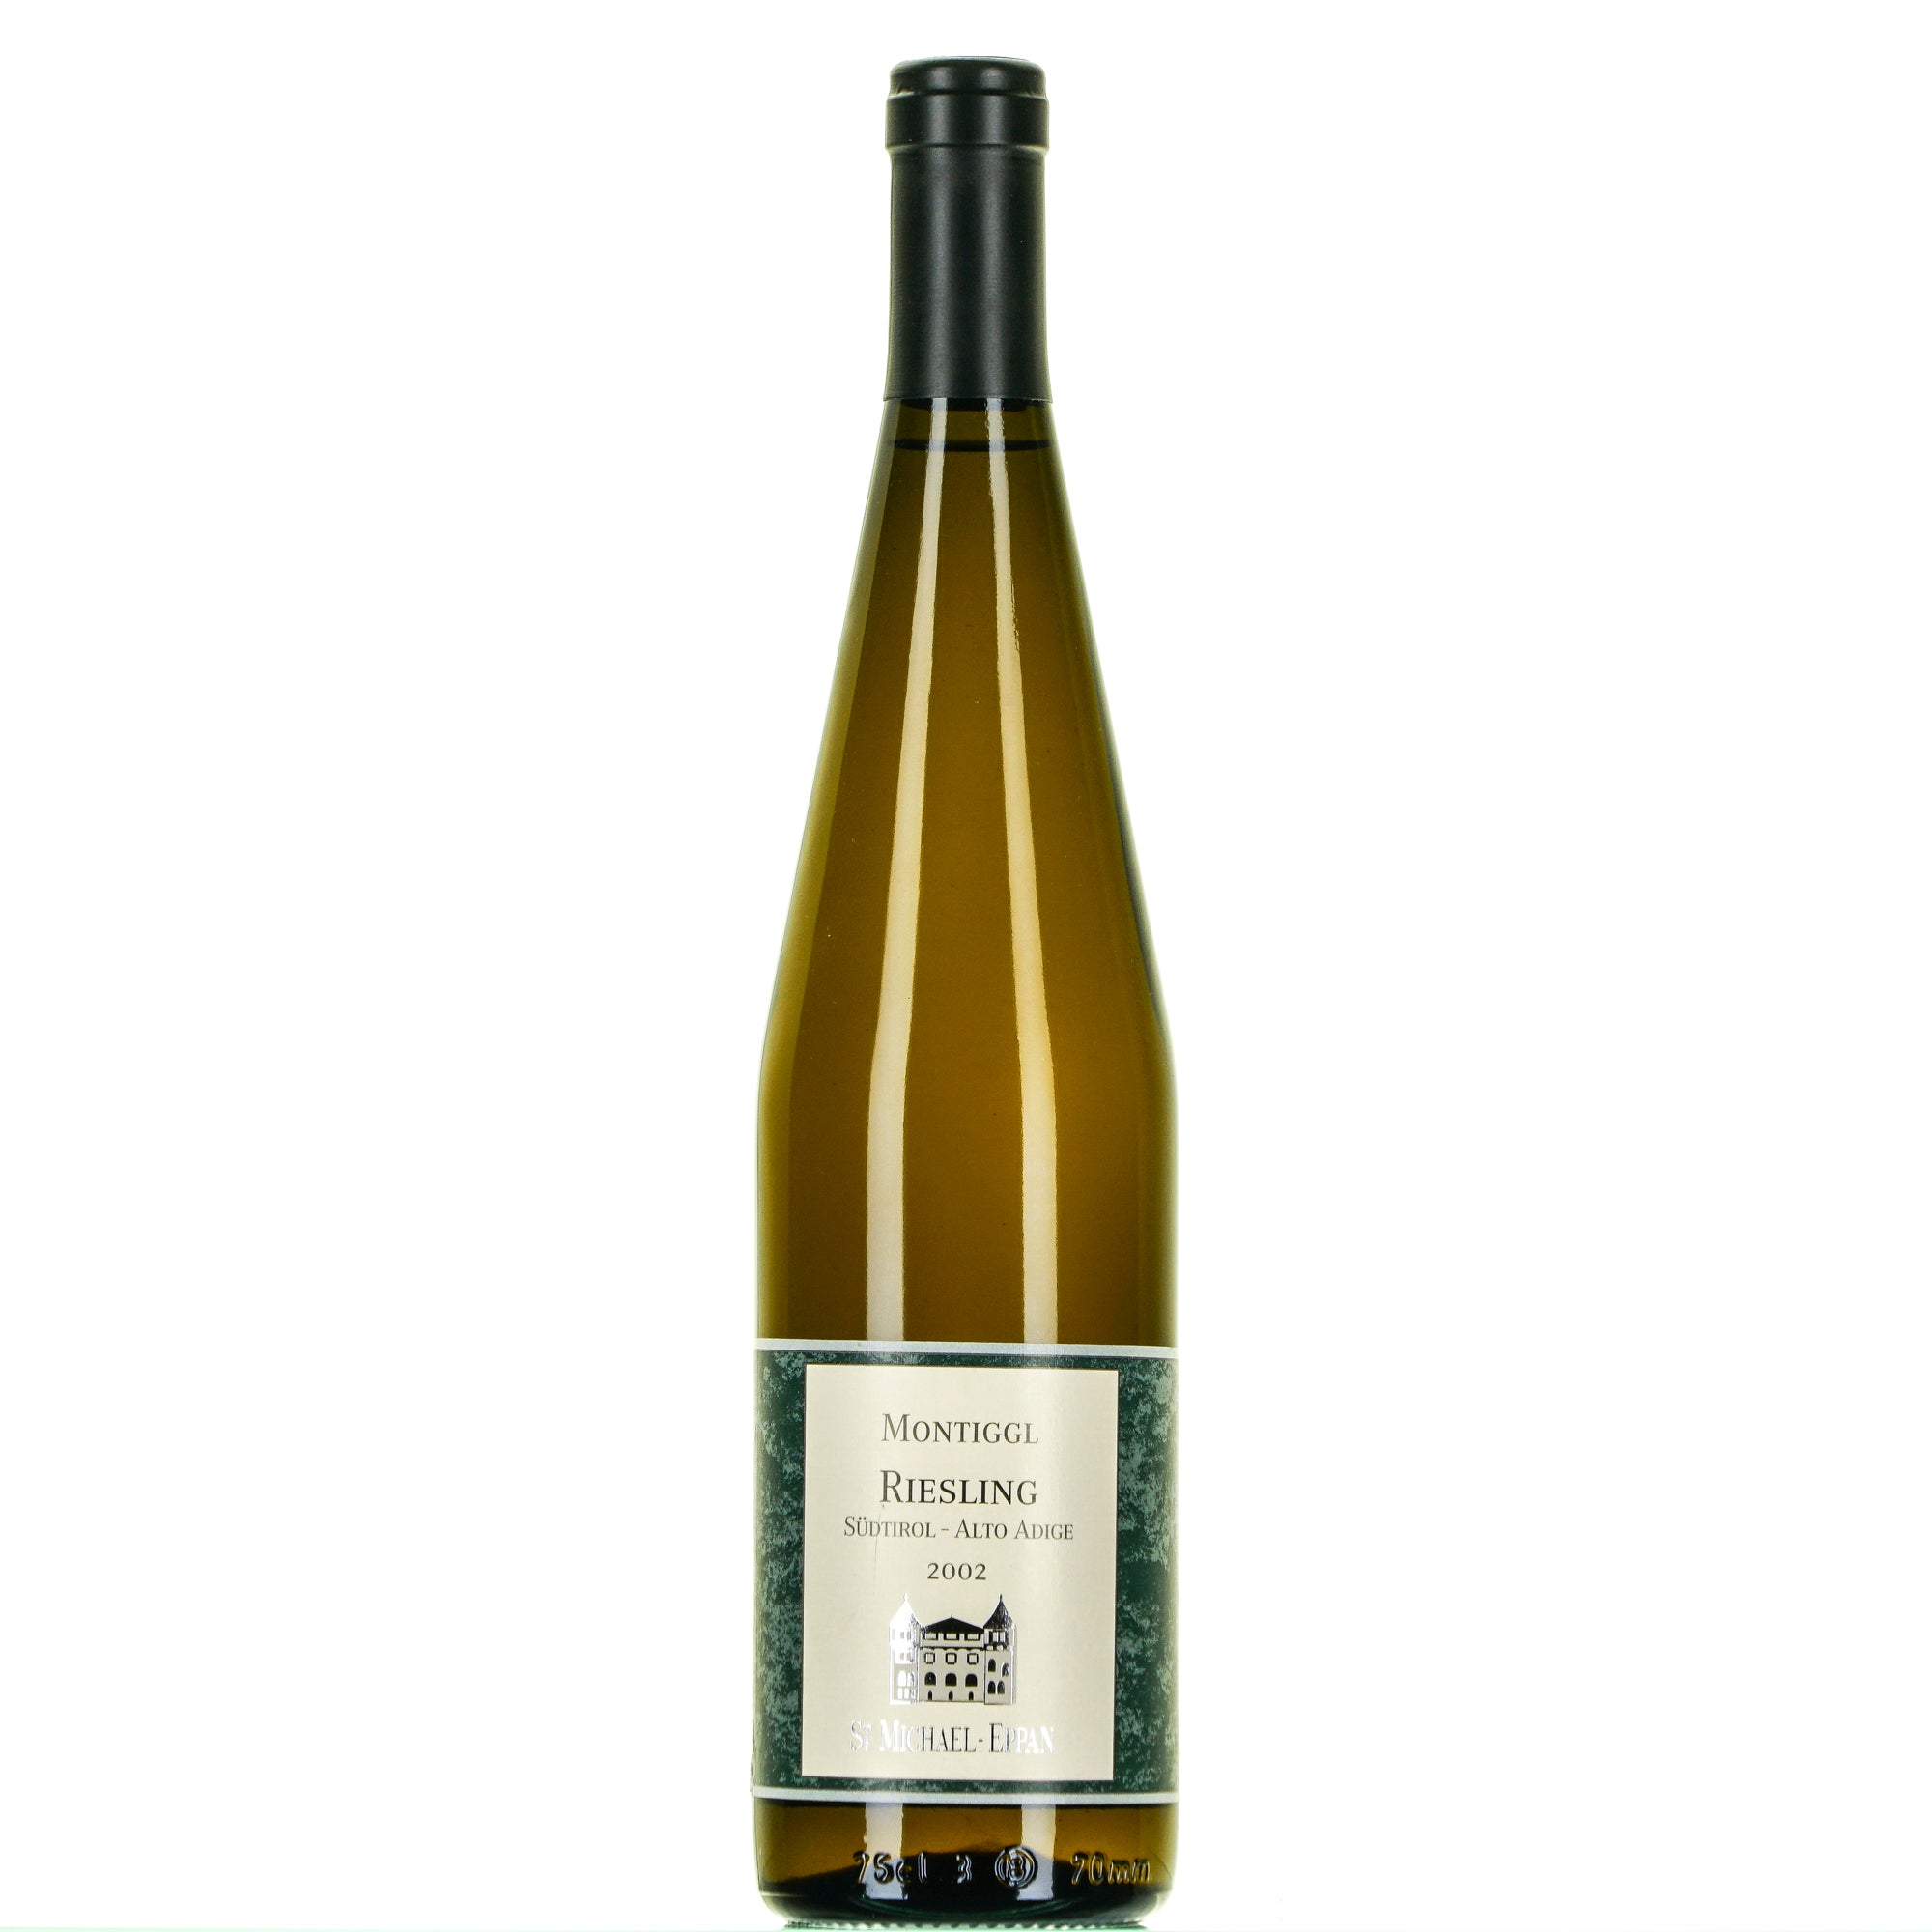 RIESLING 2002 MONTIGGL A.A.DOC lt 0,750